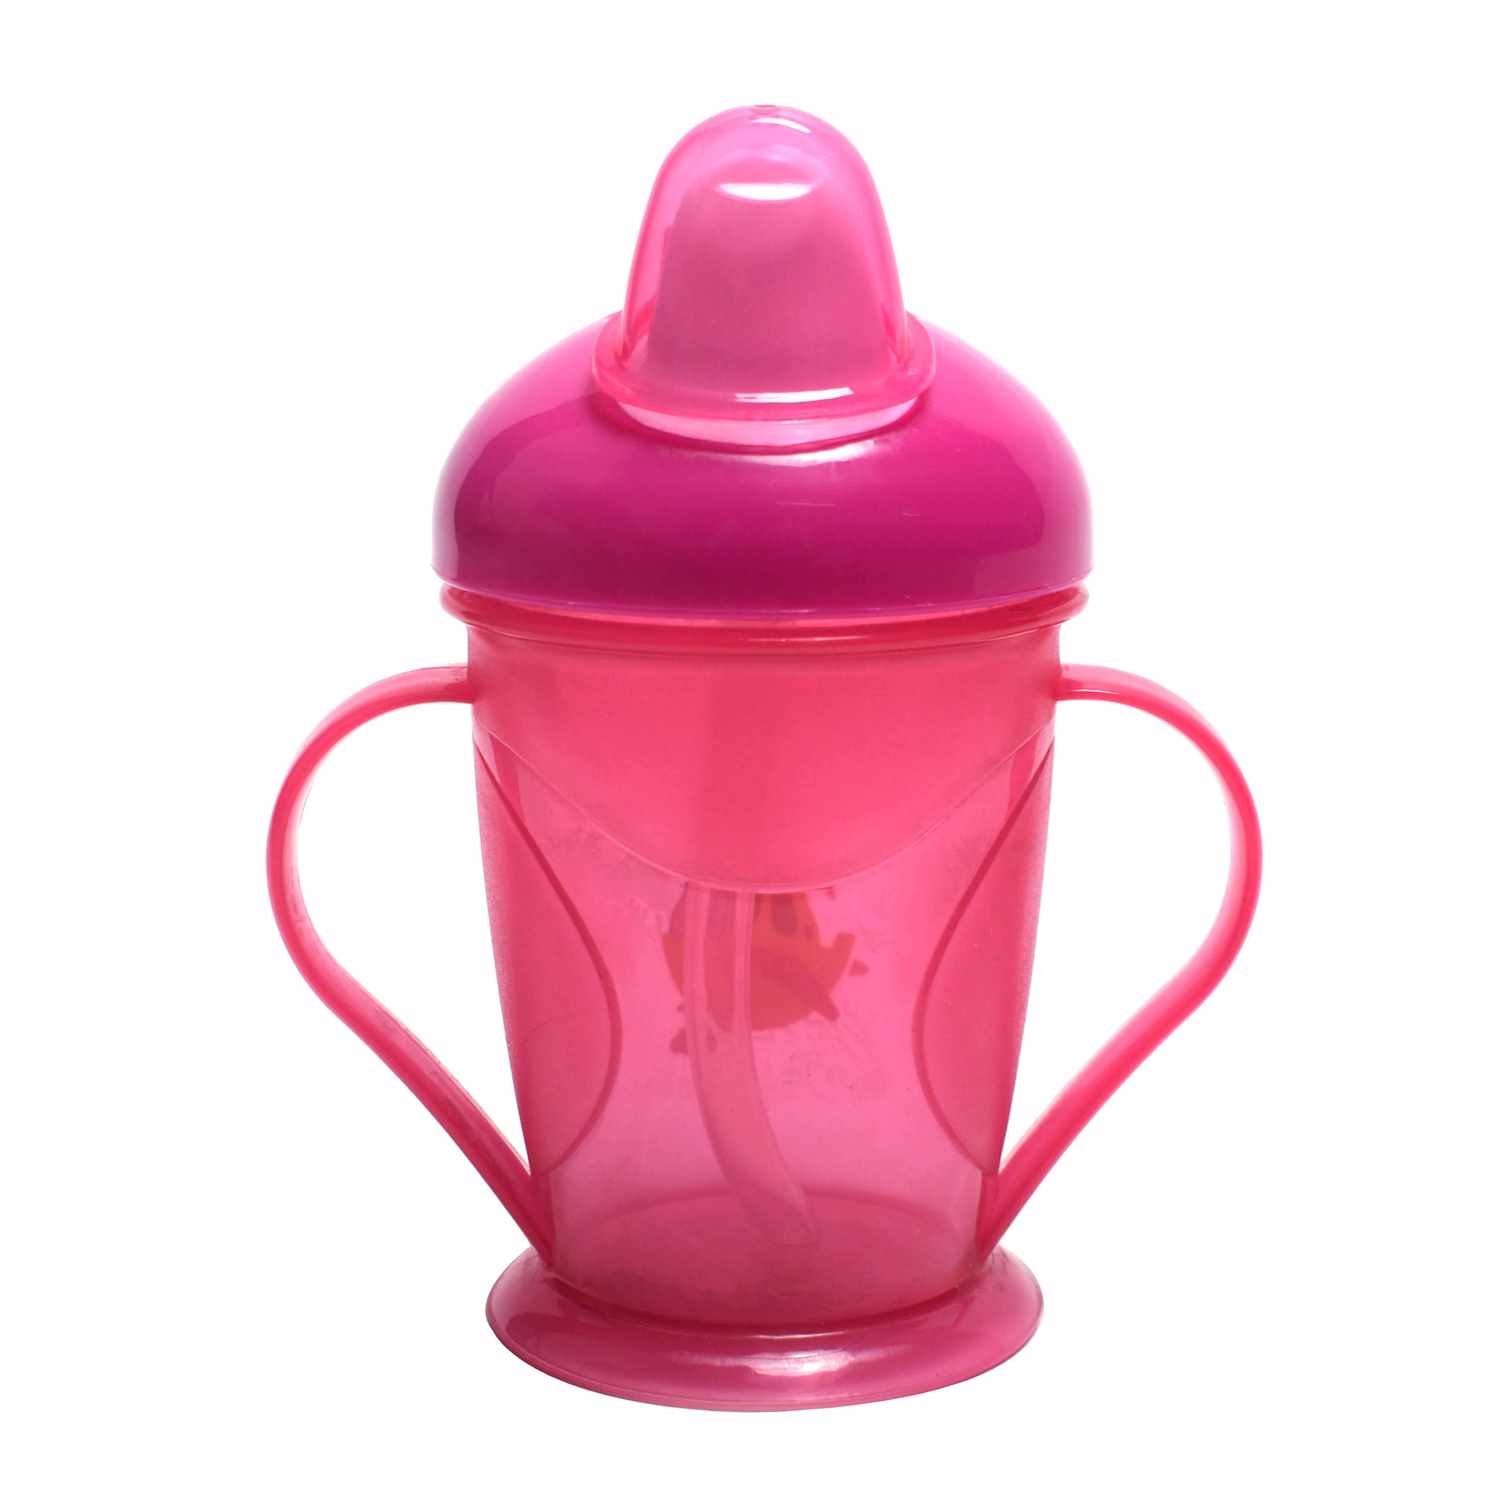 MUMLOVE Baby Silicon Spout Sipper Cup Pink - 200 ml